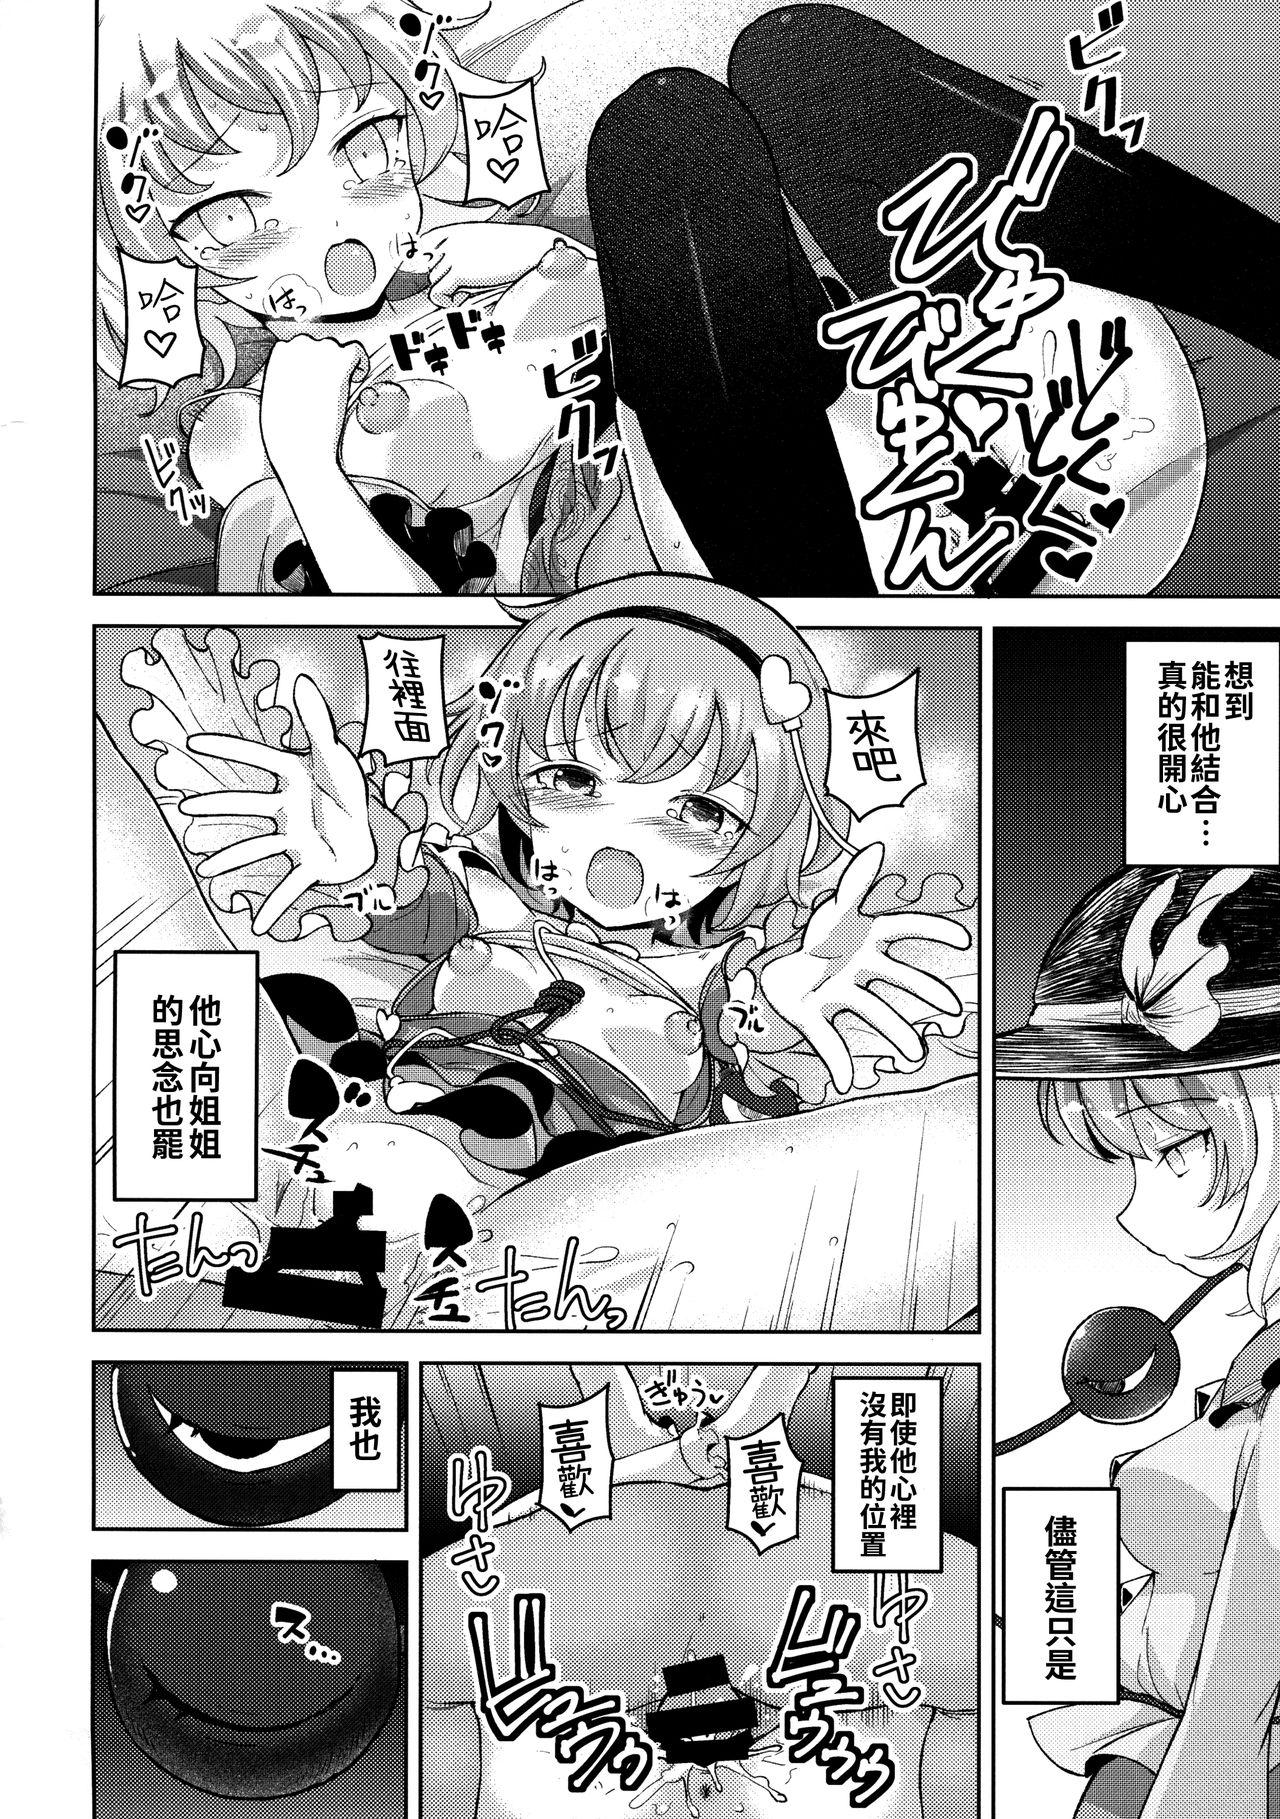 Hijab Aisare Chireiden - Touhou project Cheerleader - Page 6